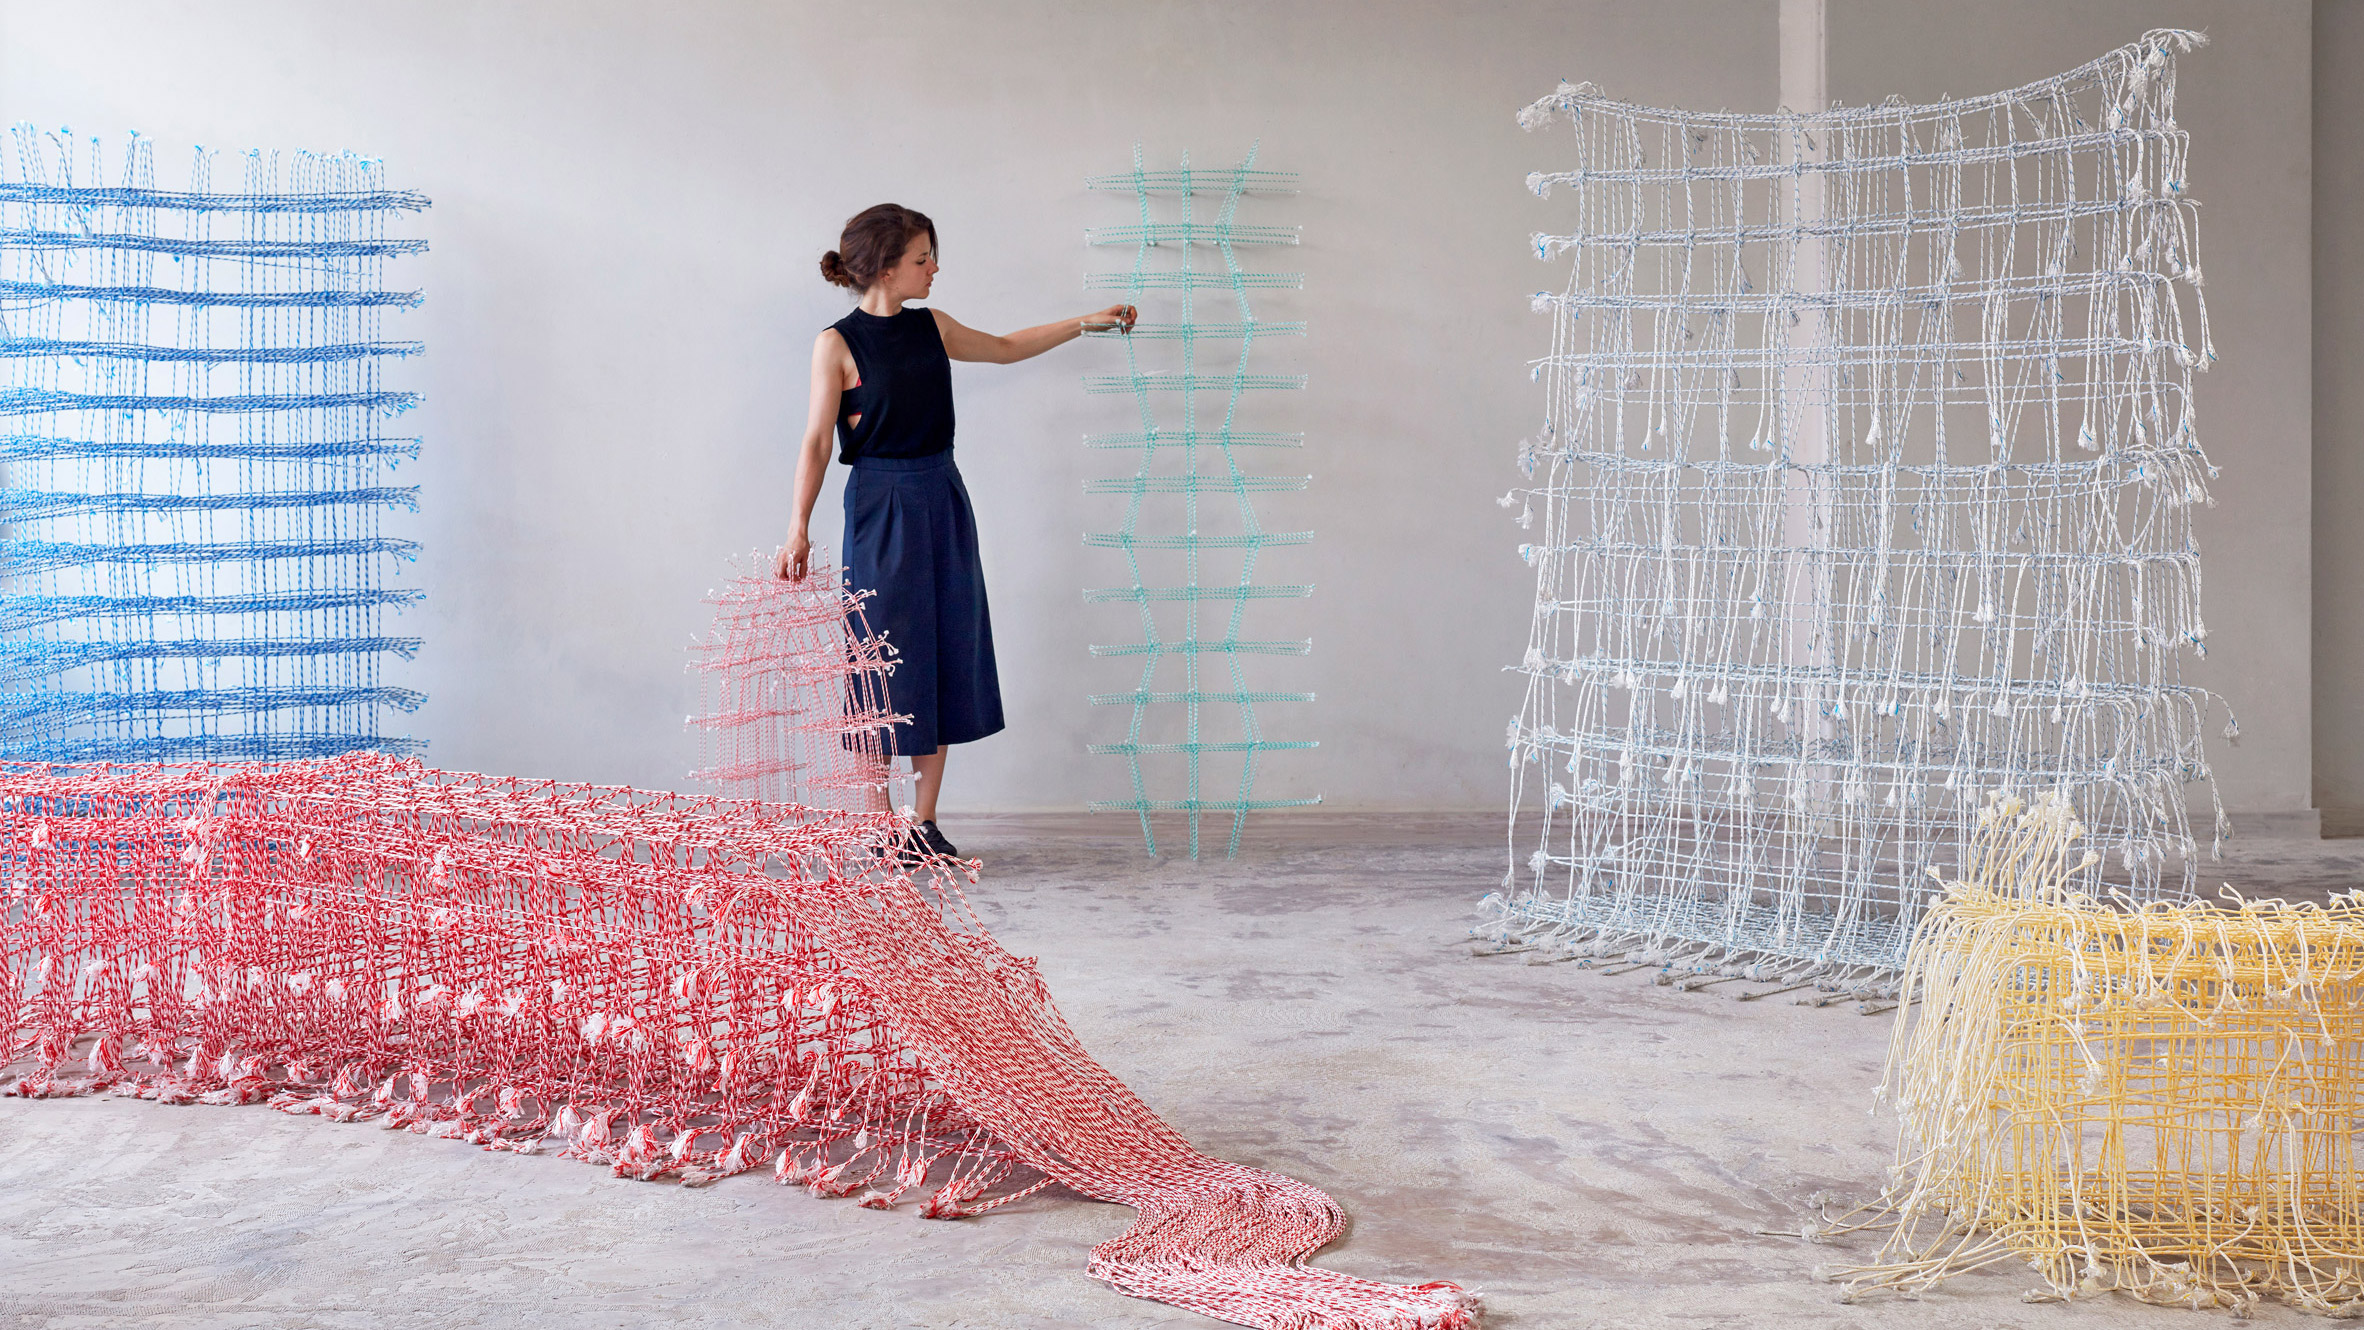 Fransje Gimbrere creates sculptures from natural fibre and recycled plastic